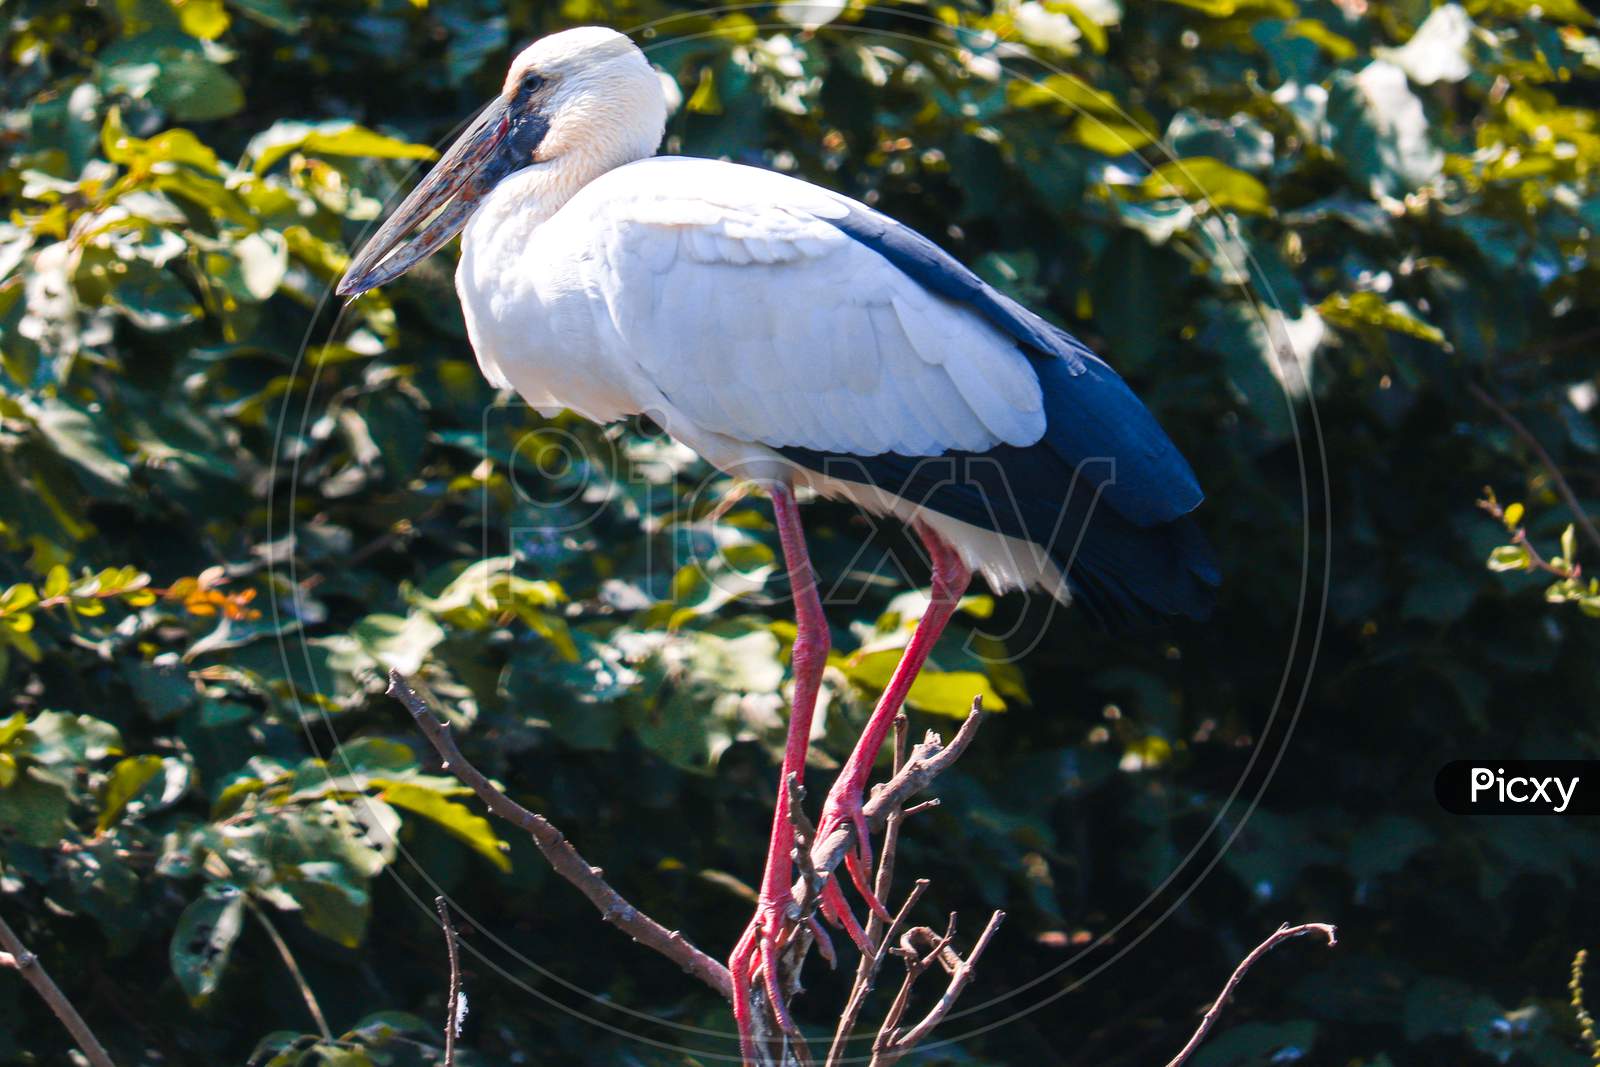 THIS IS A PHOTO OF ASIAN OPENBILL